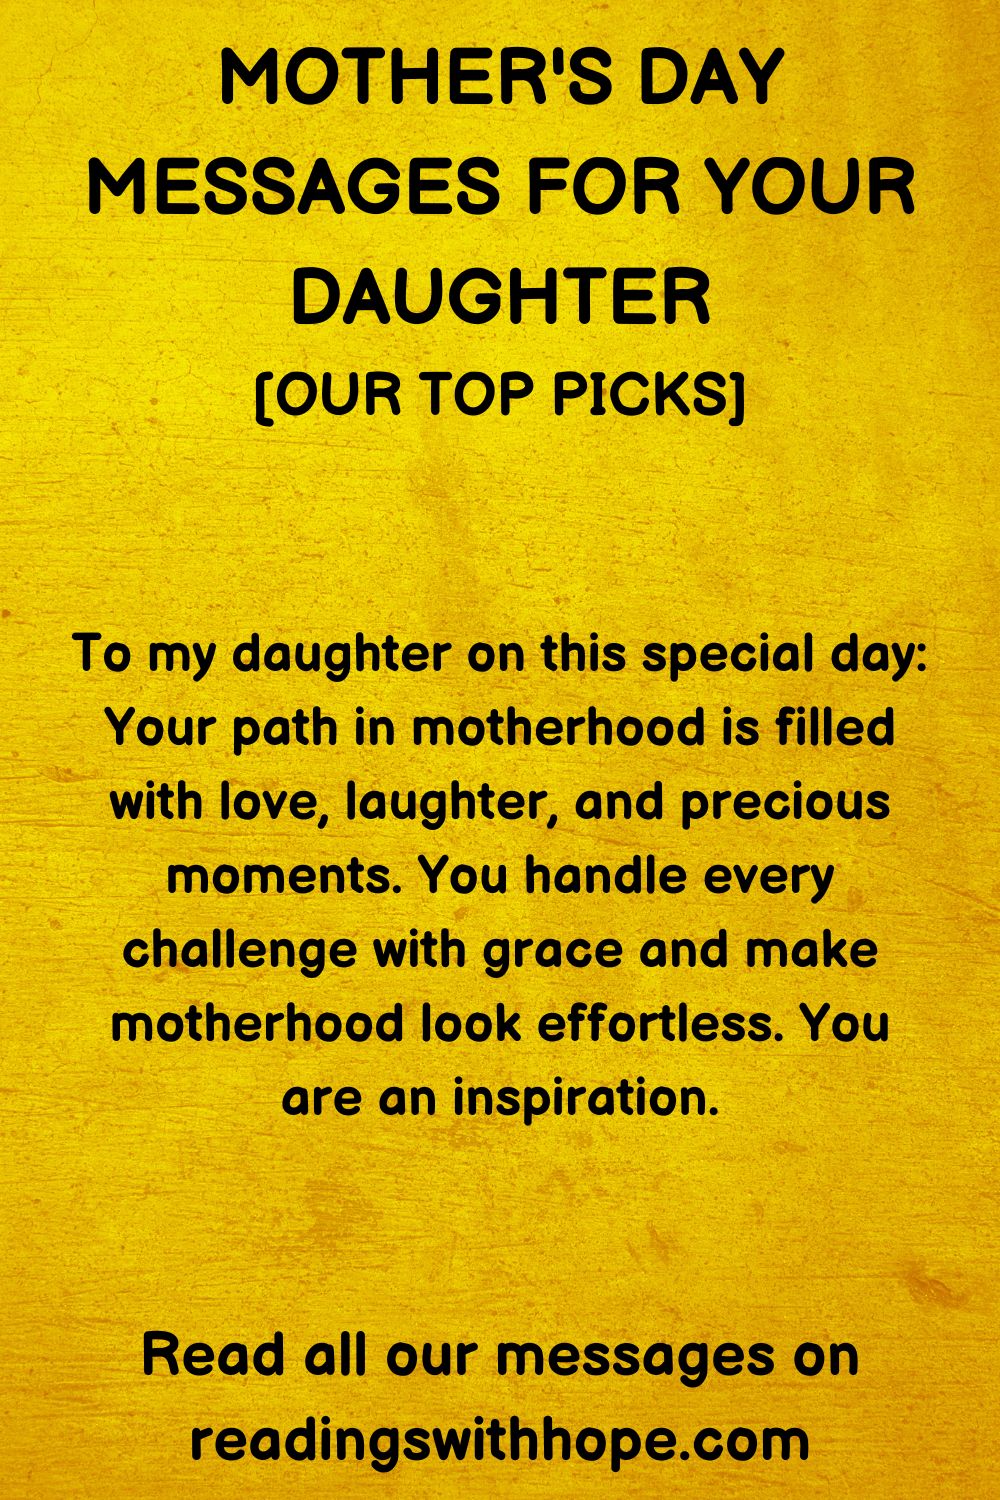 45 Mother's Day Messages For Your Daughter